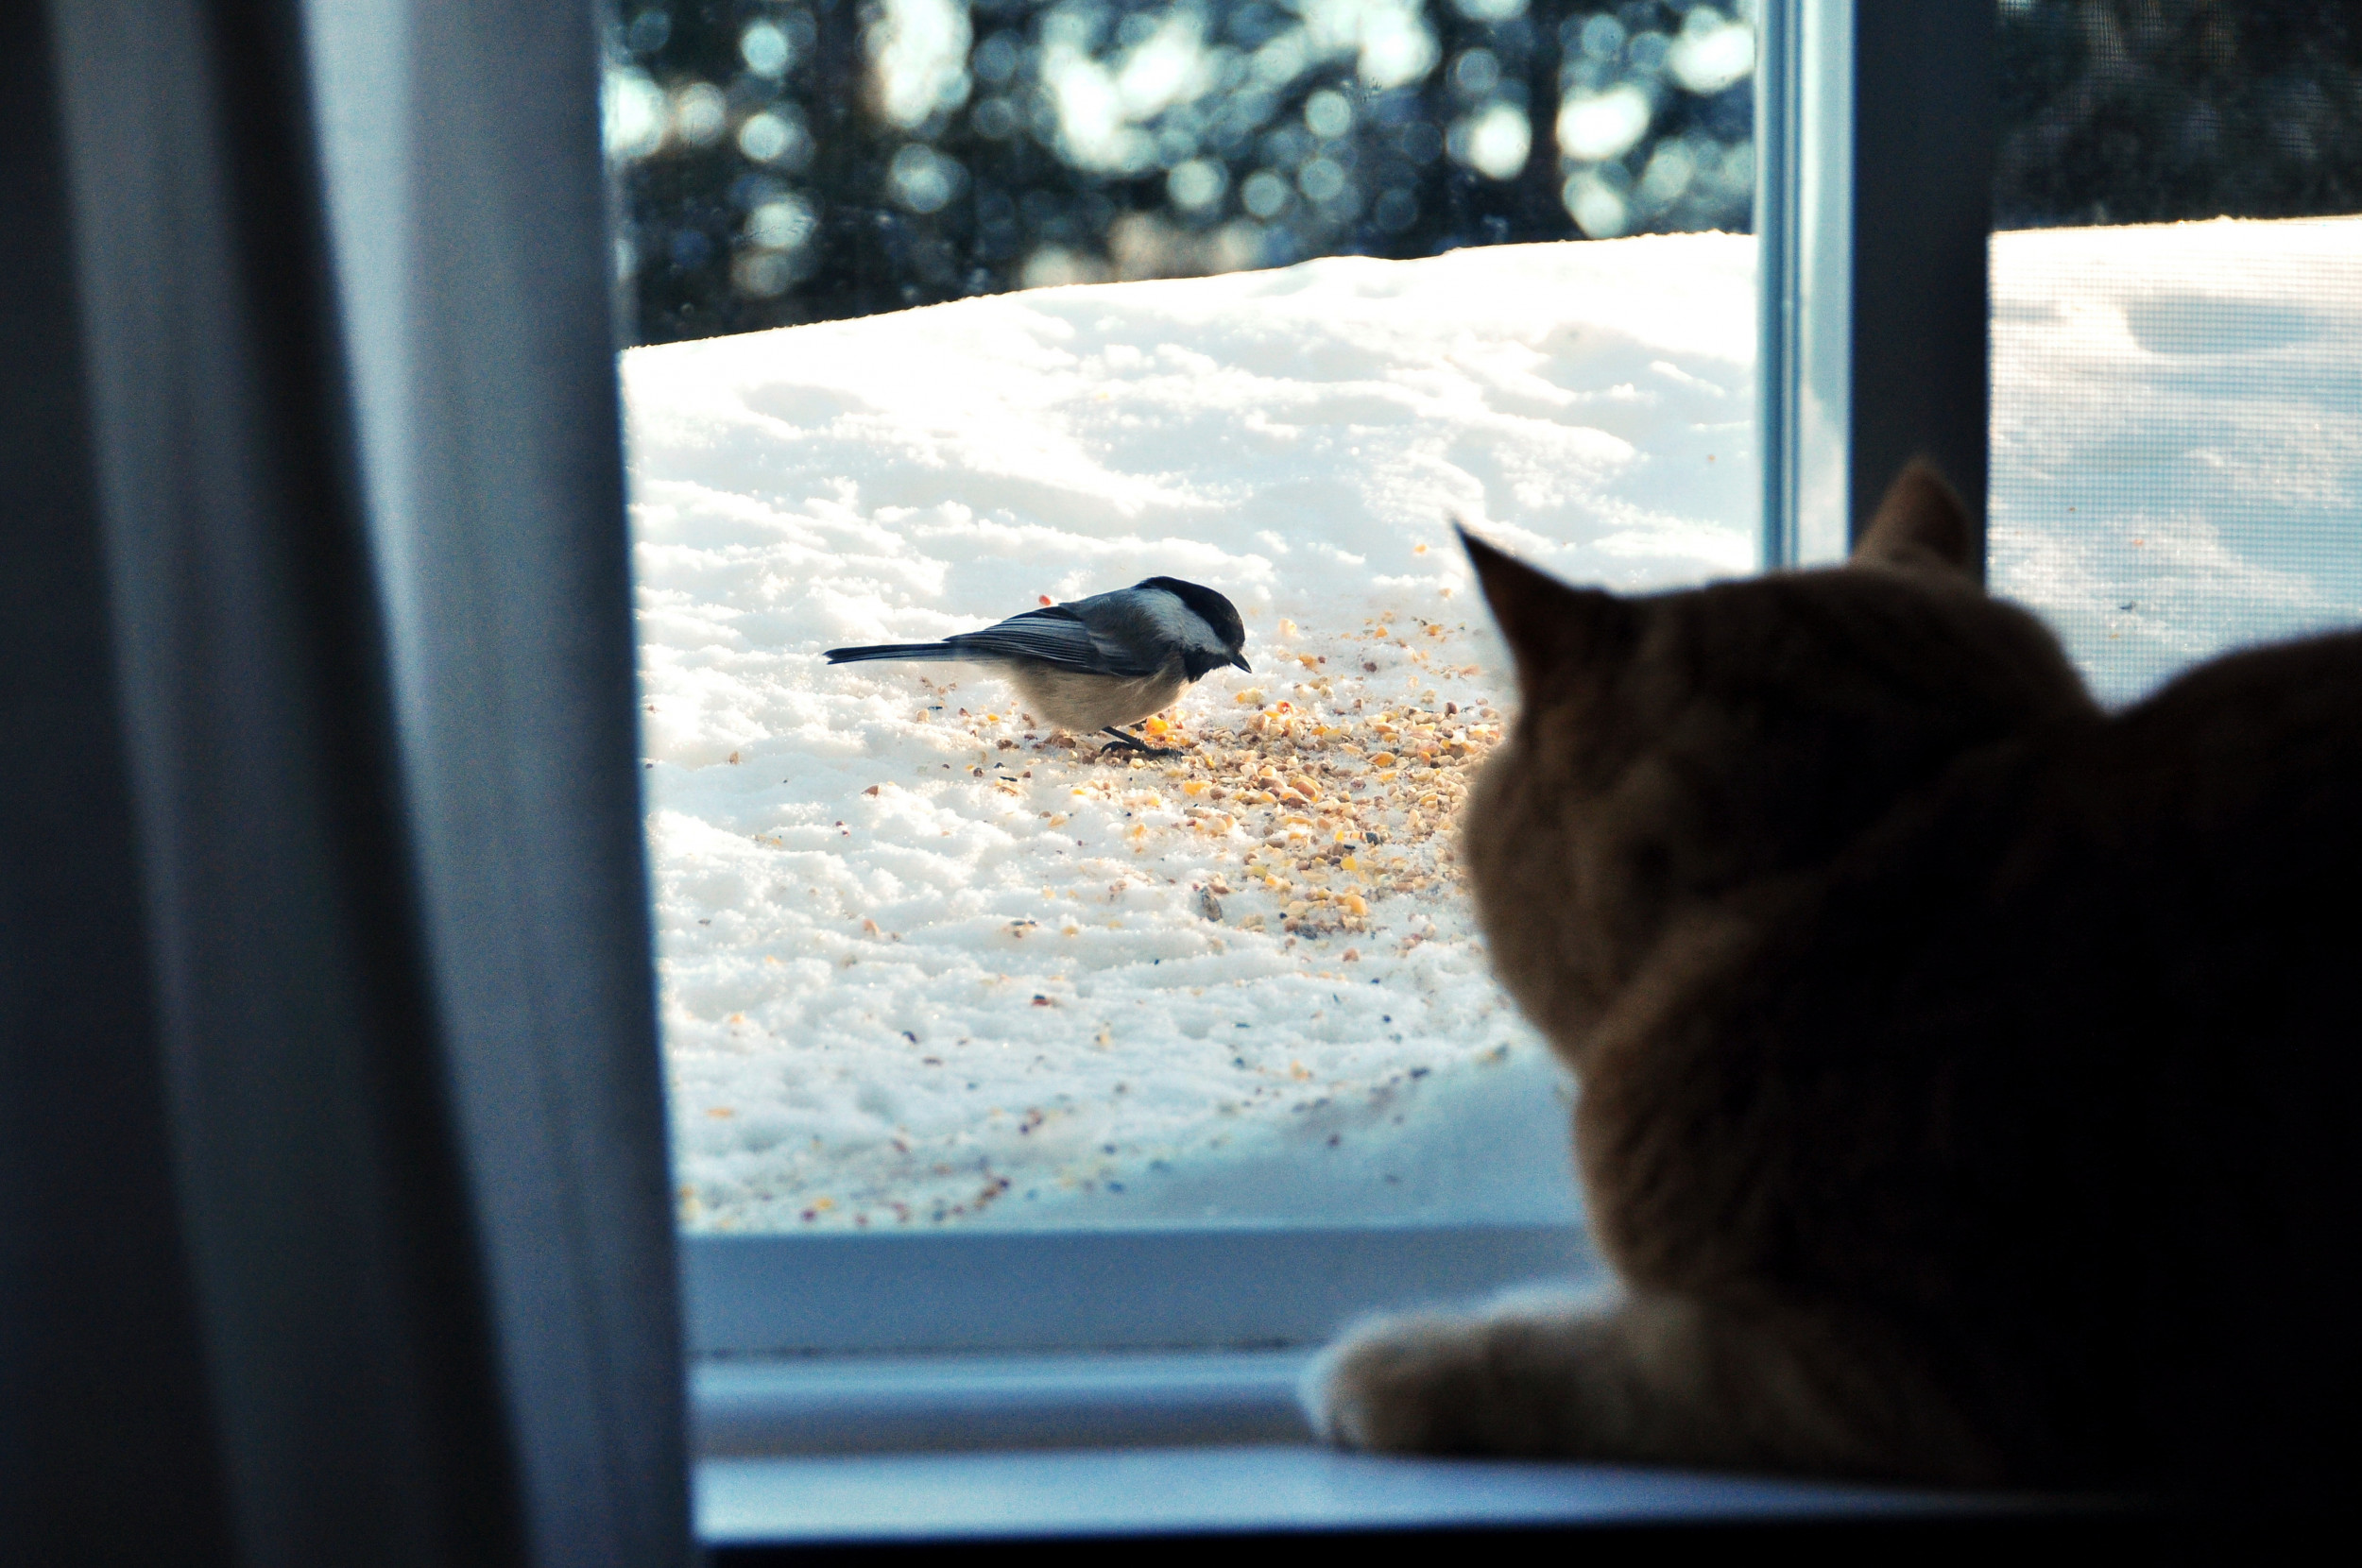 Man Joining Cat To Watch Birds Melts Hearts Online: ‘Cutest Thing’